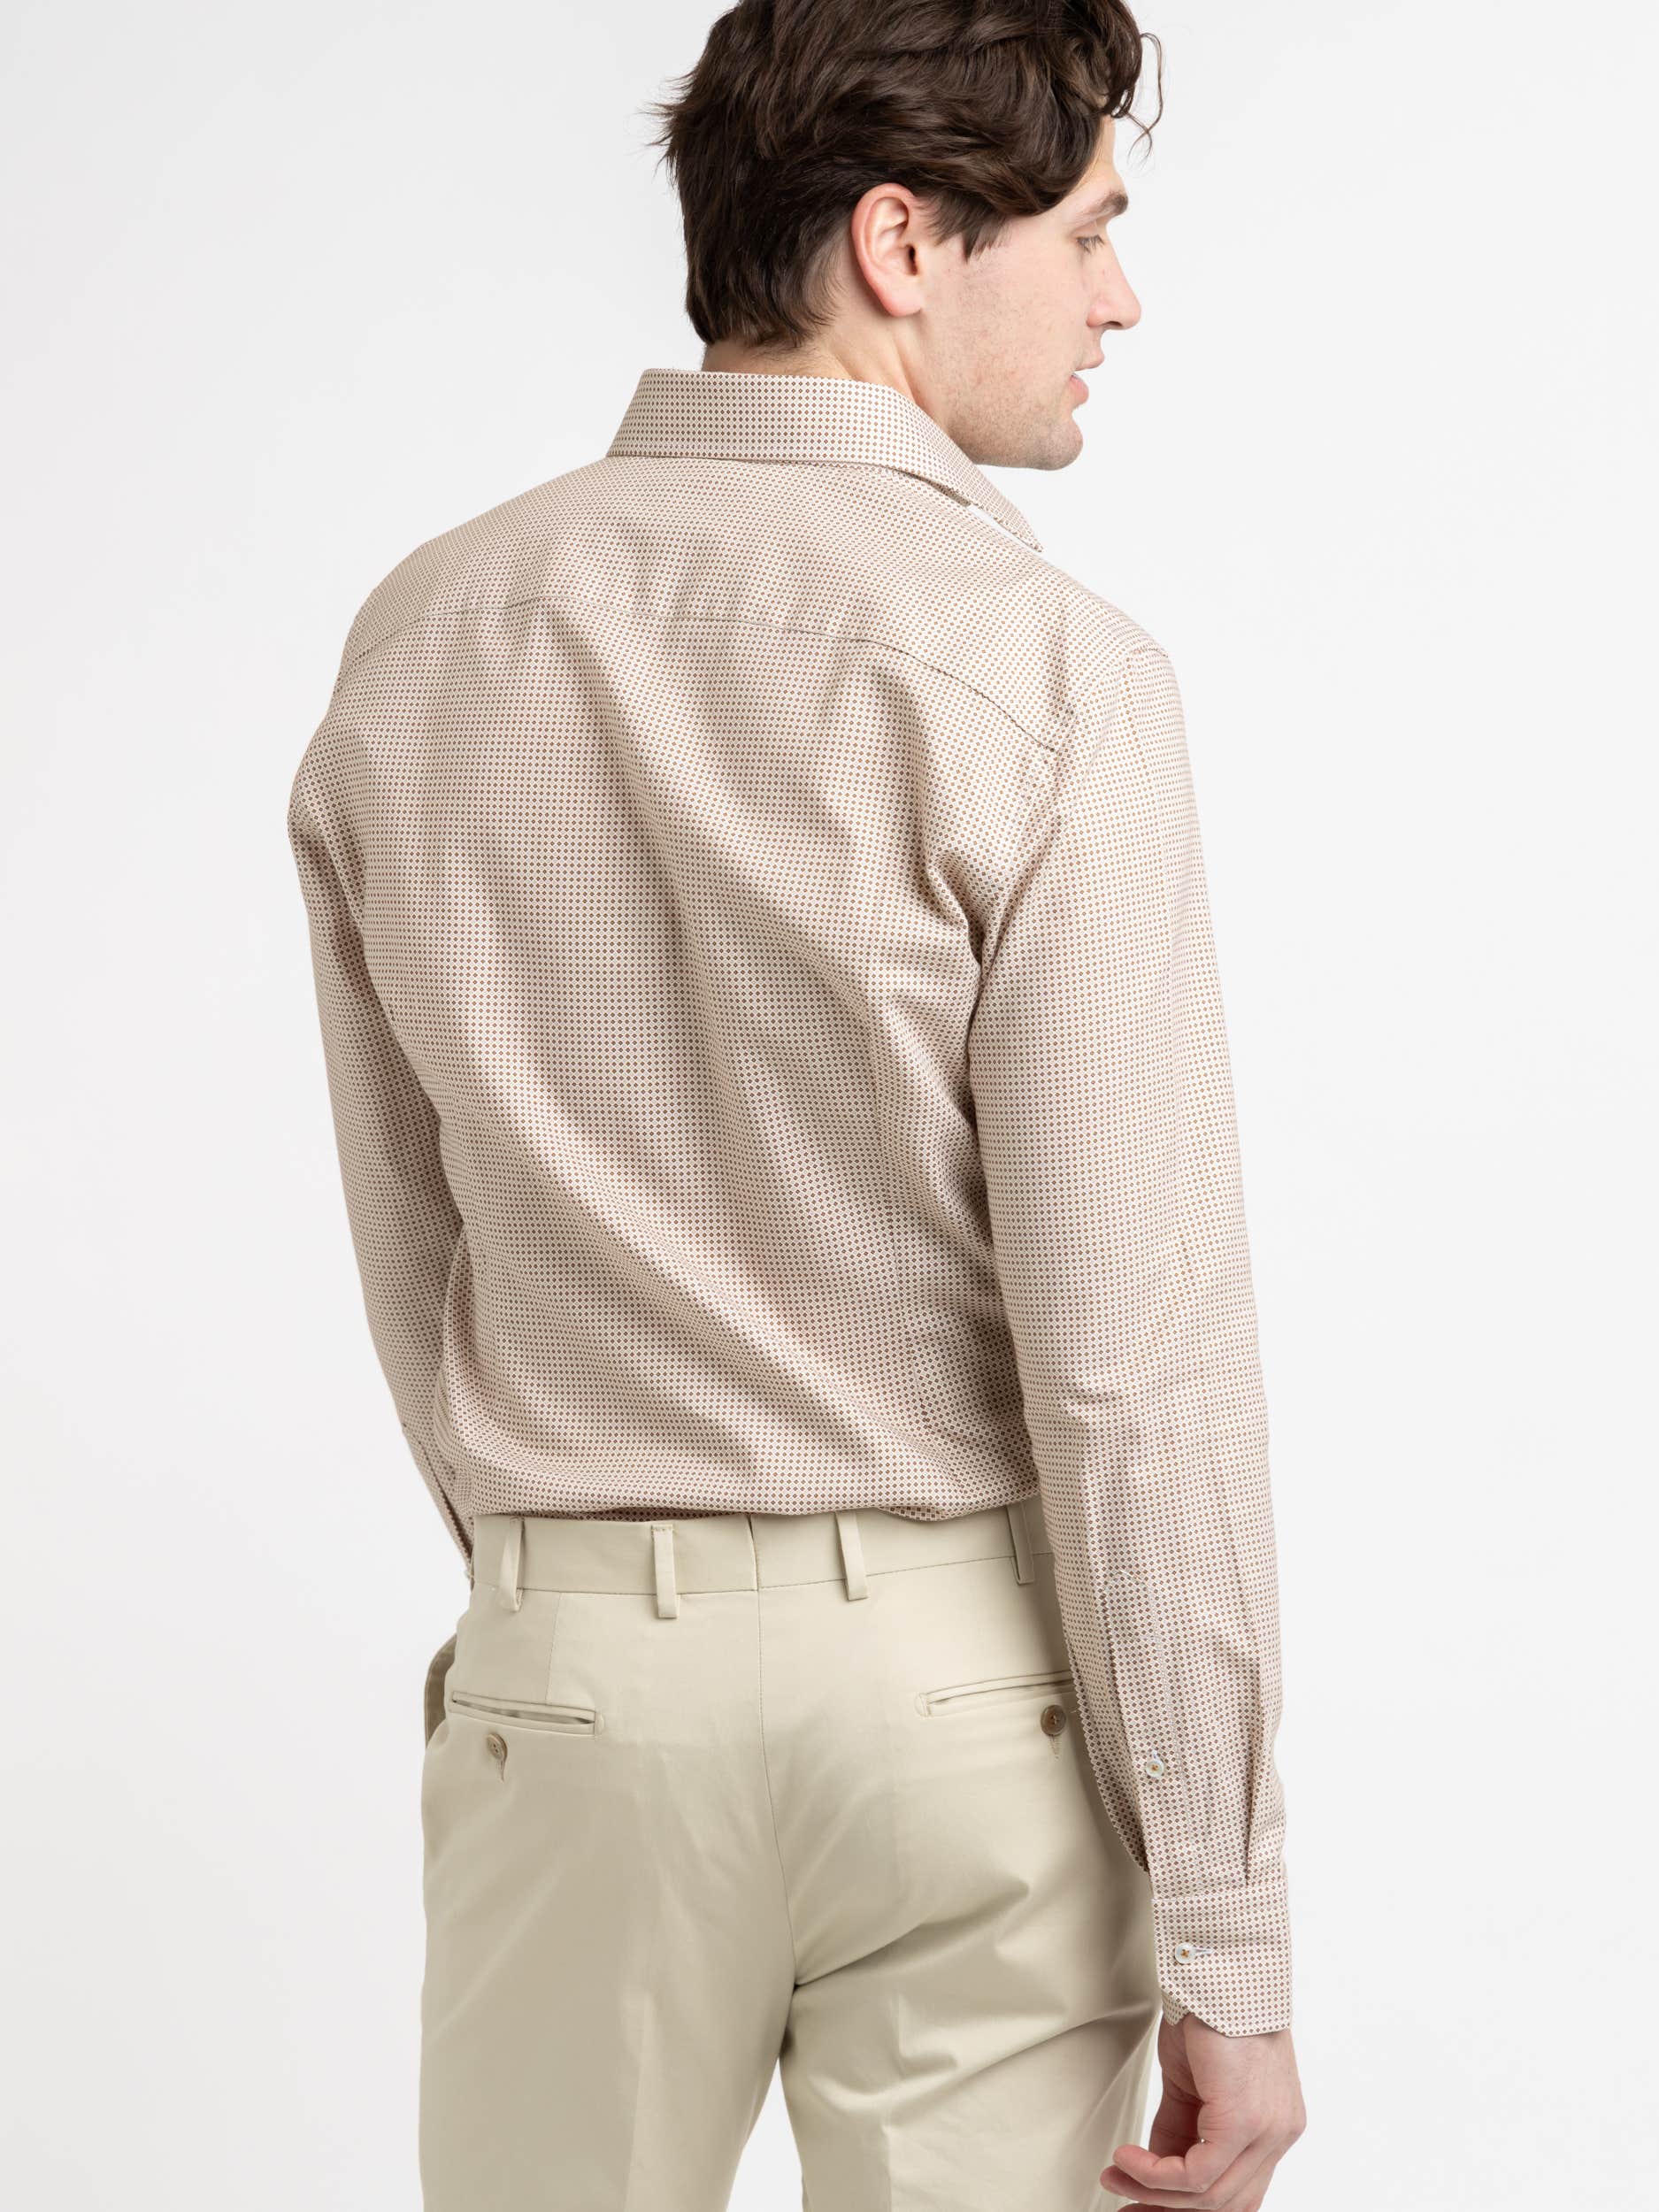 Brown Micro Patterned Twill Shirt